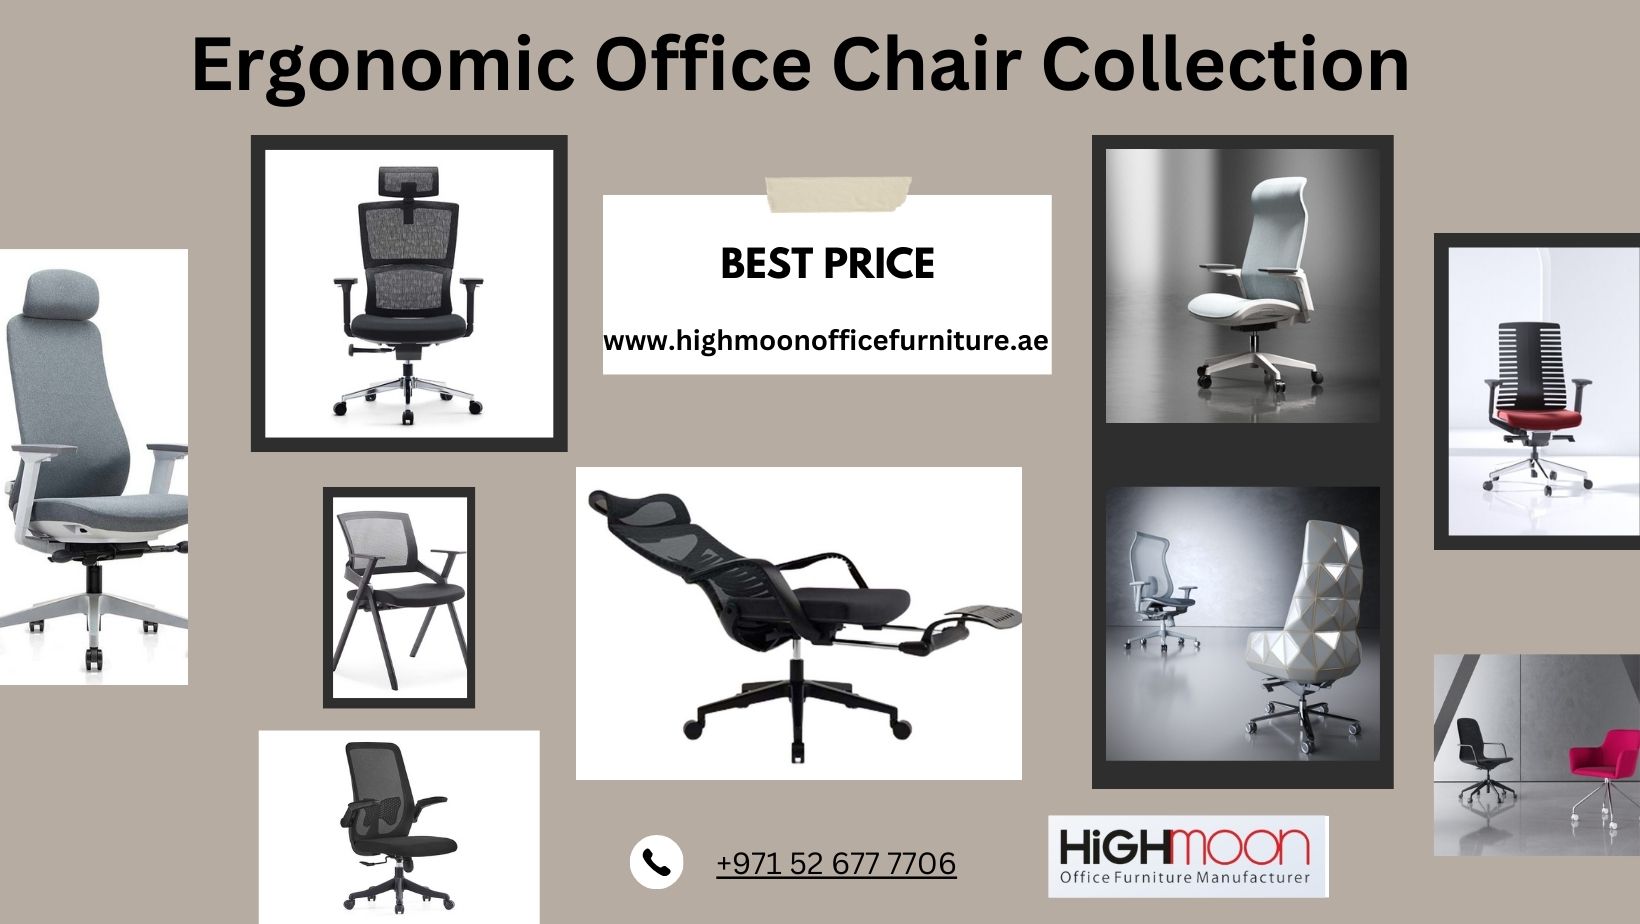 Office Chair Shop - Buy Ergonomic Chairs from Best Ergonomic Office Furniture Shop in UAE